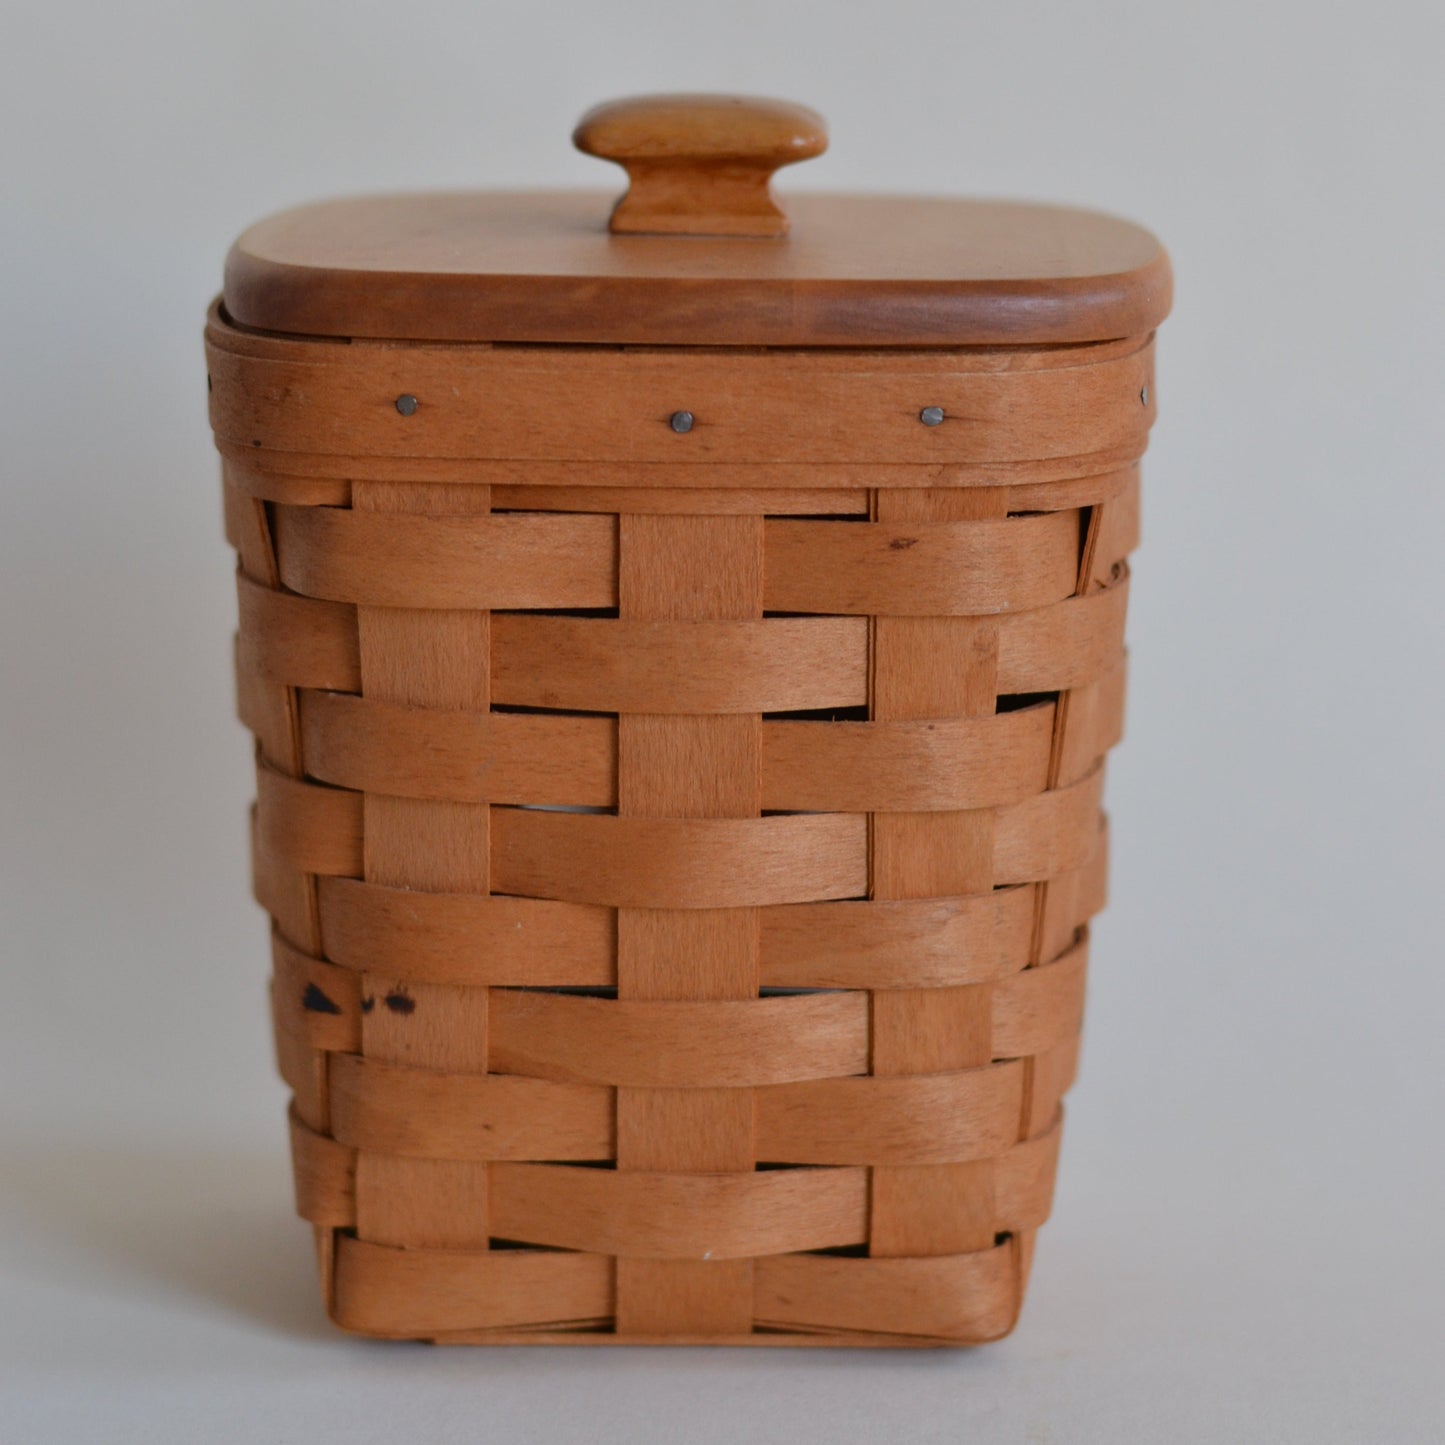 Basket with Wooden Lid